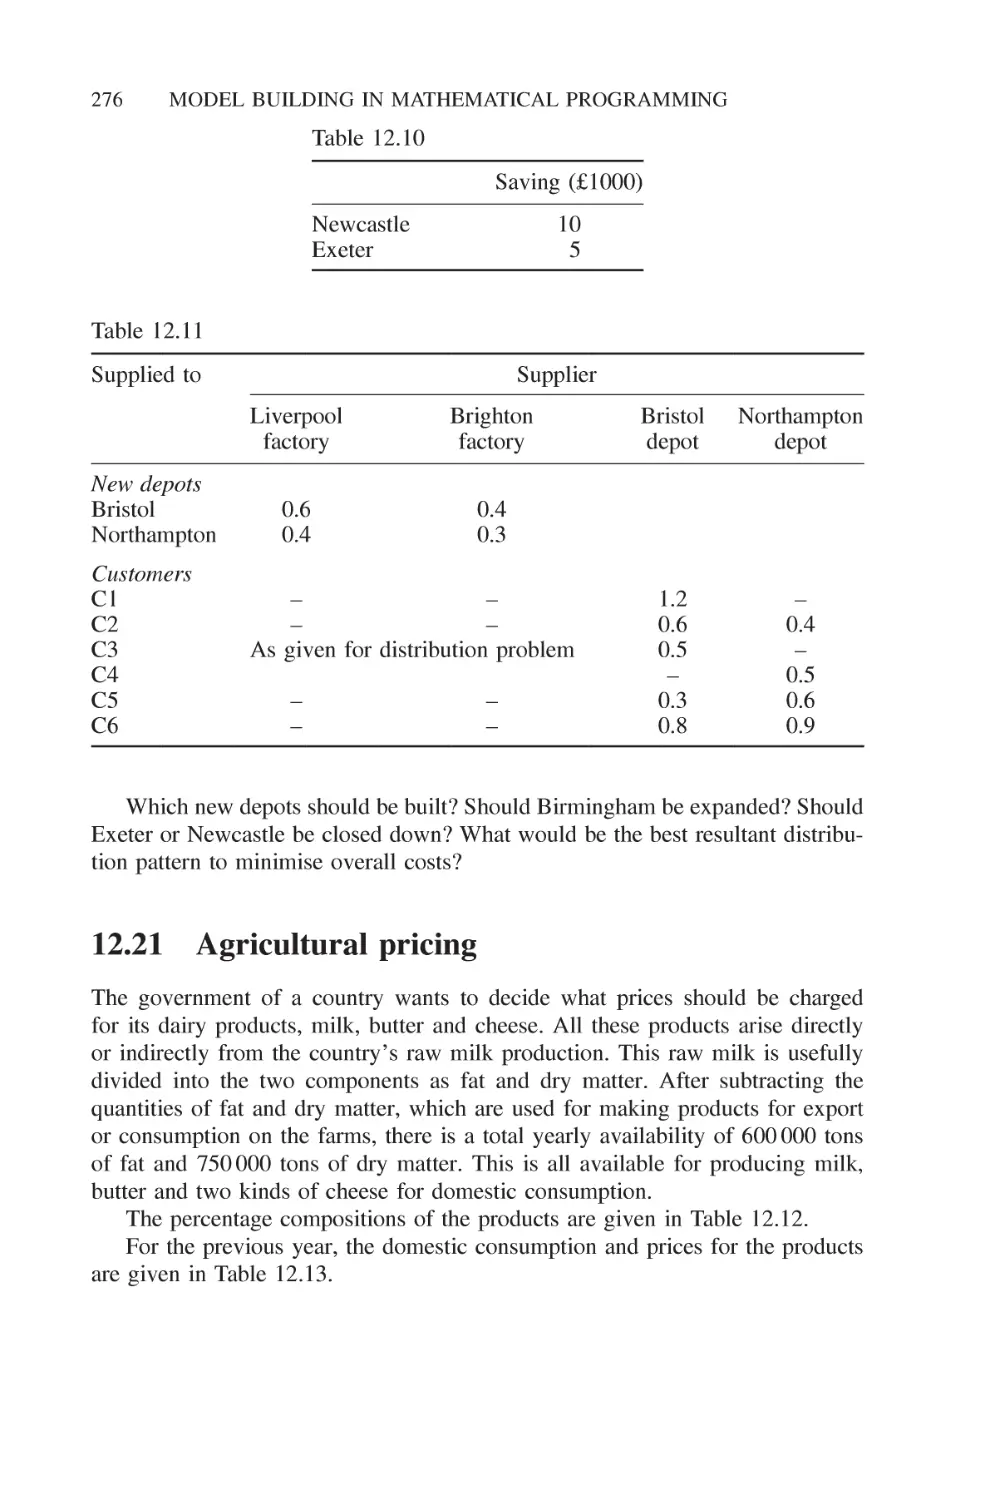 12.21 Agricultural pricing